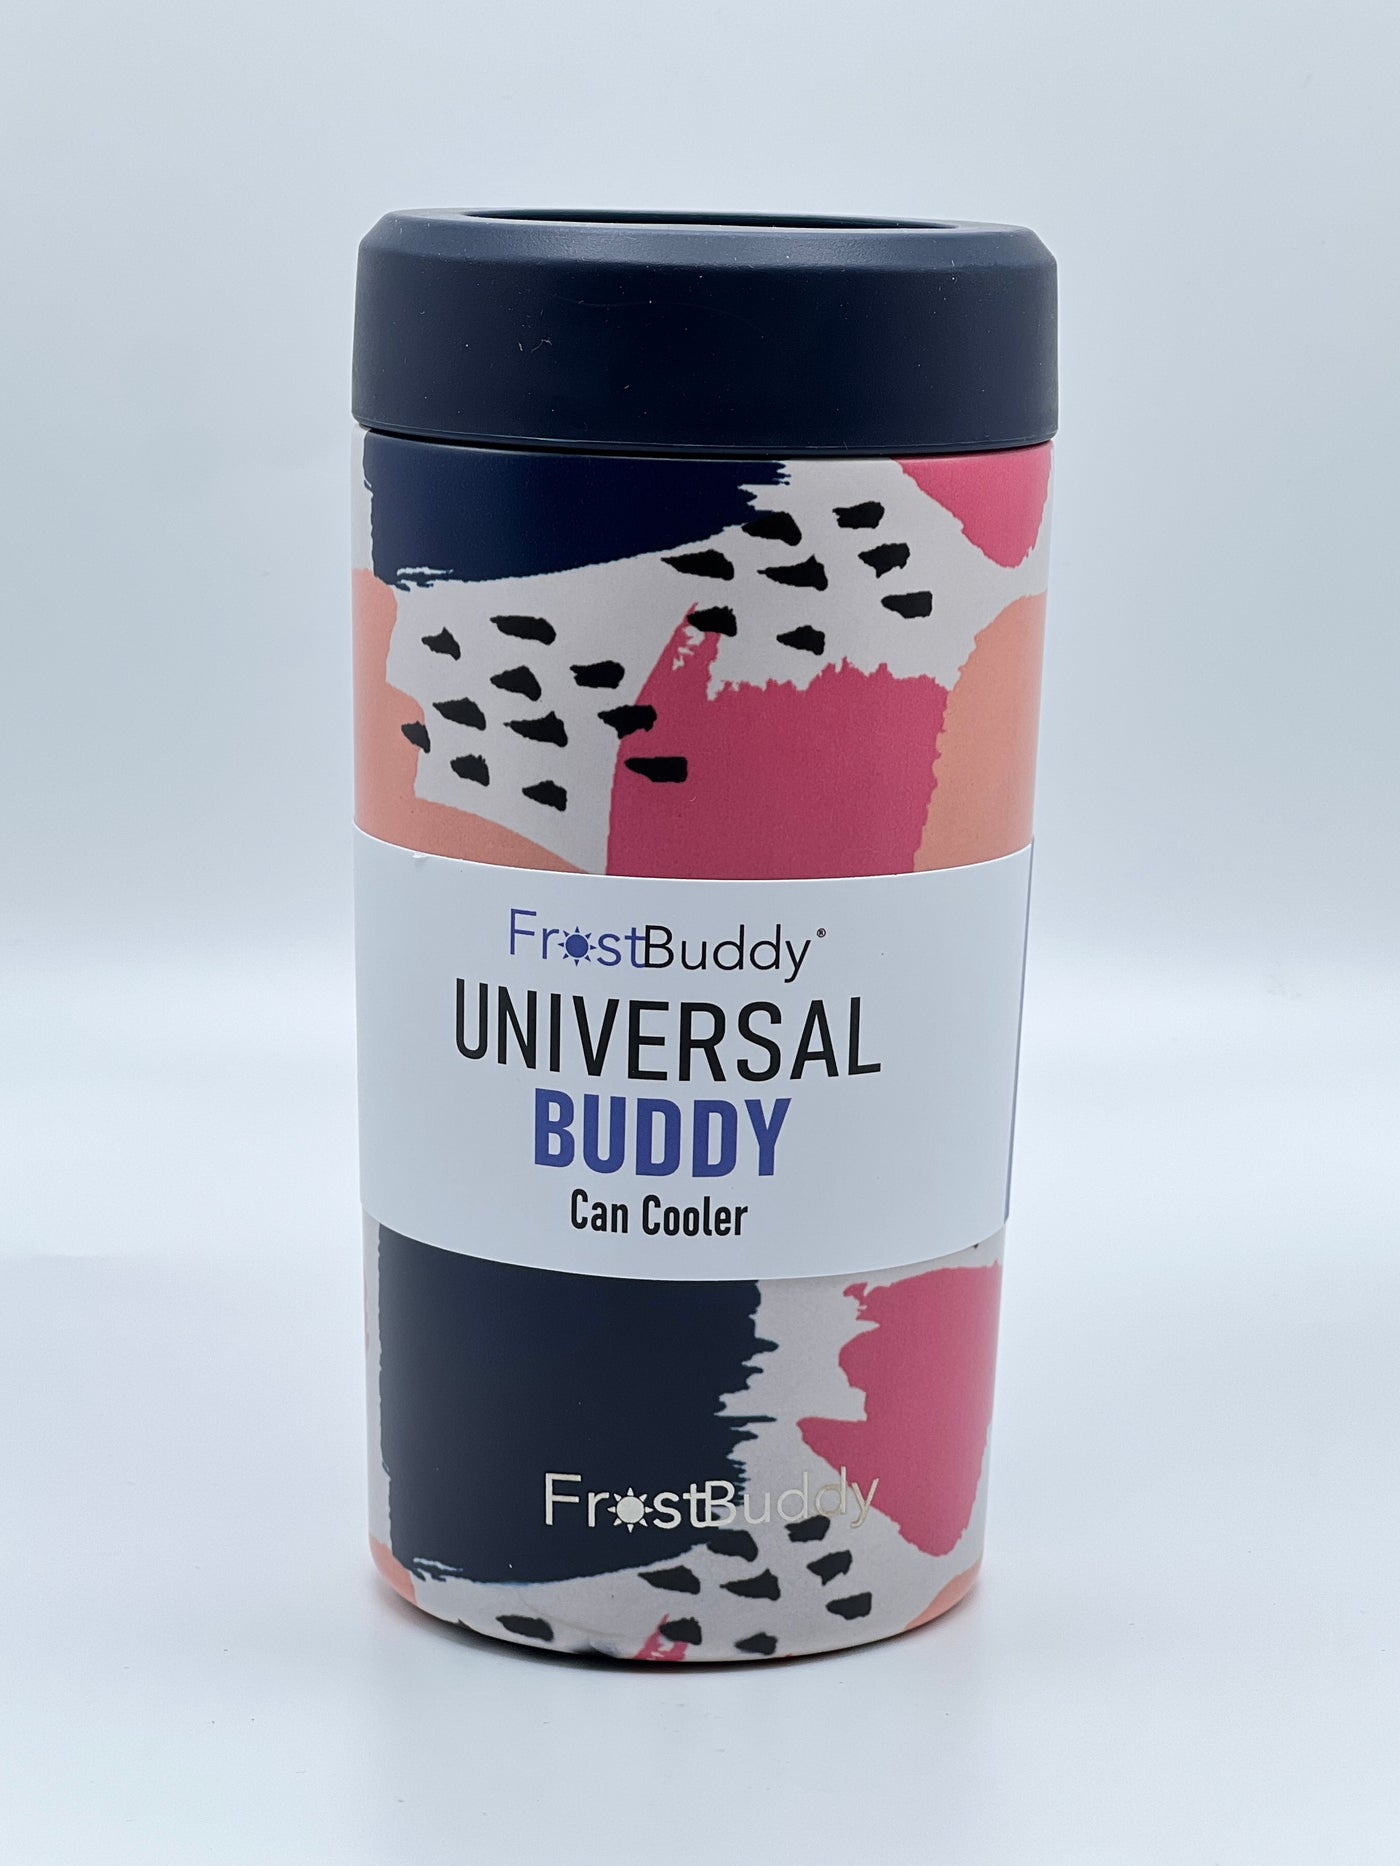 Frost Buddy Universal, 5-in-1 can cooler can is a summer must-have -  Parenting Healthy